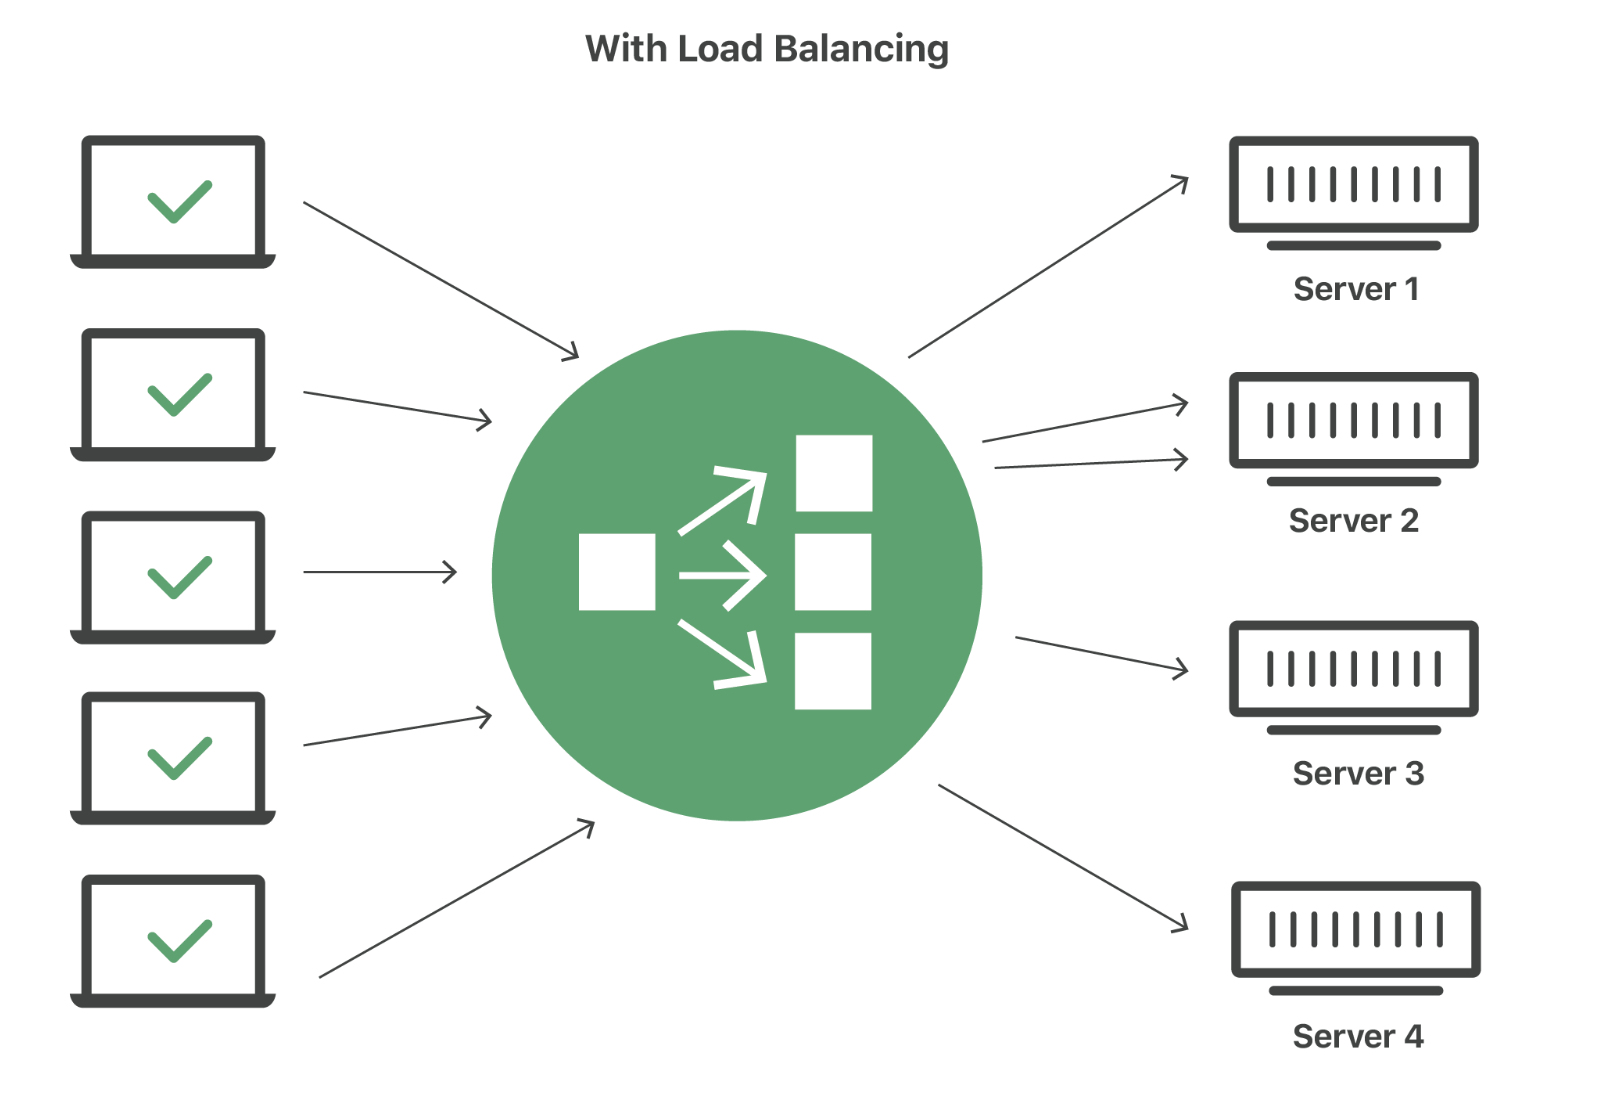 A load balancer distributes traffic across your servers